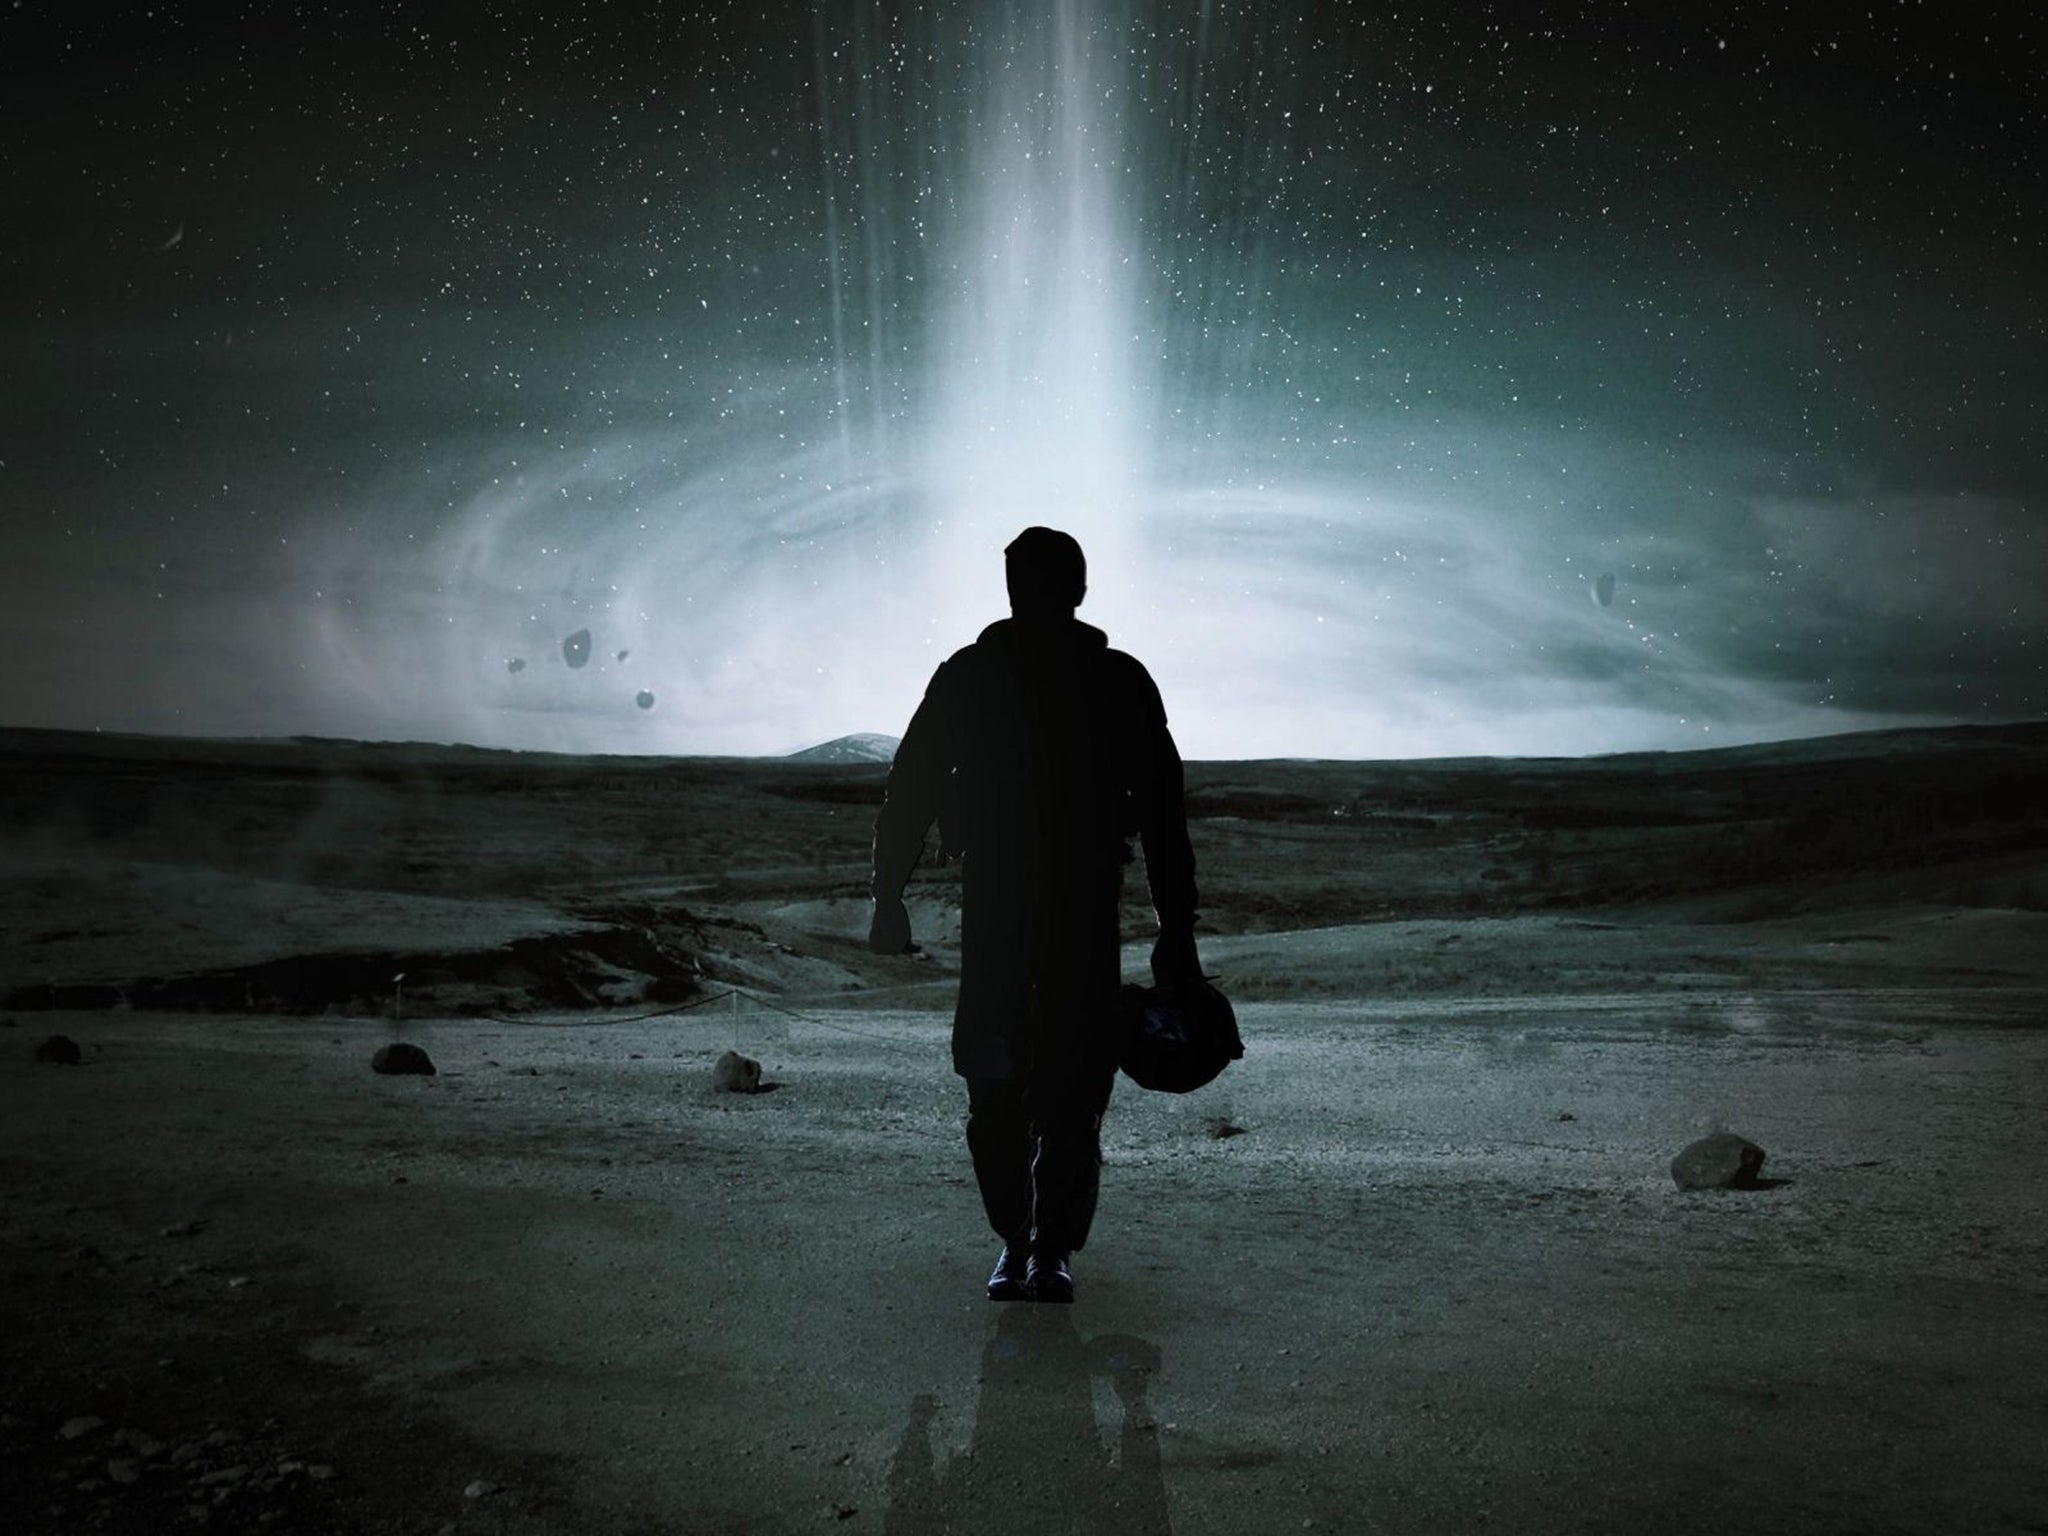 The apocalyptic vision of the future painted in 'Interstellar' could be closer than we think